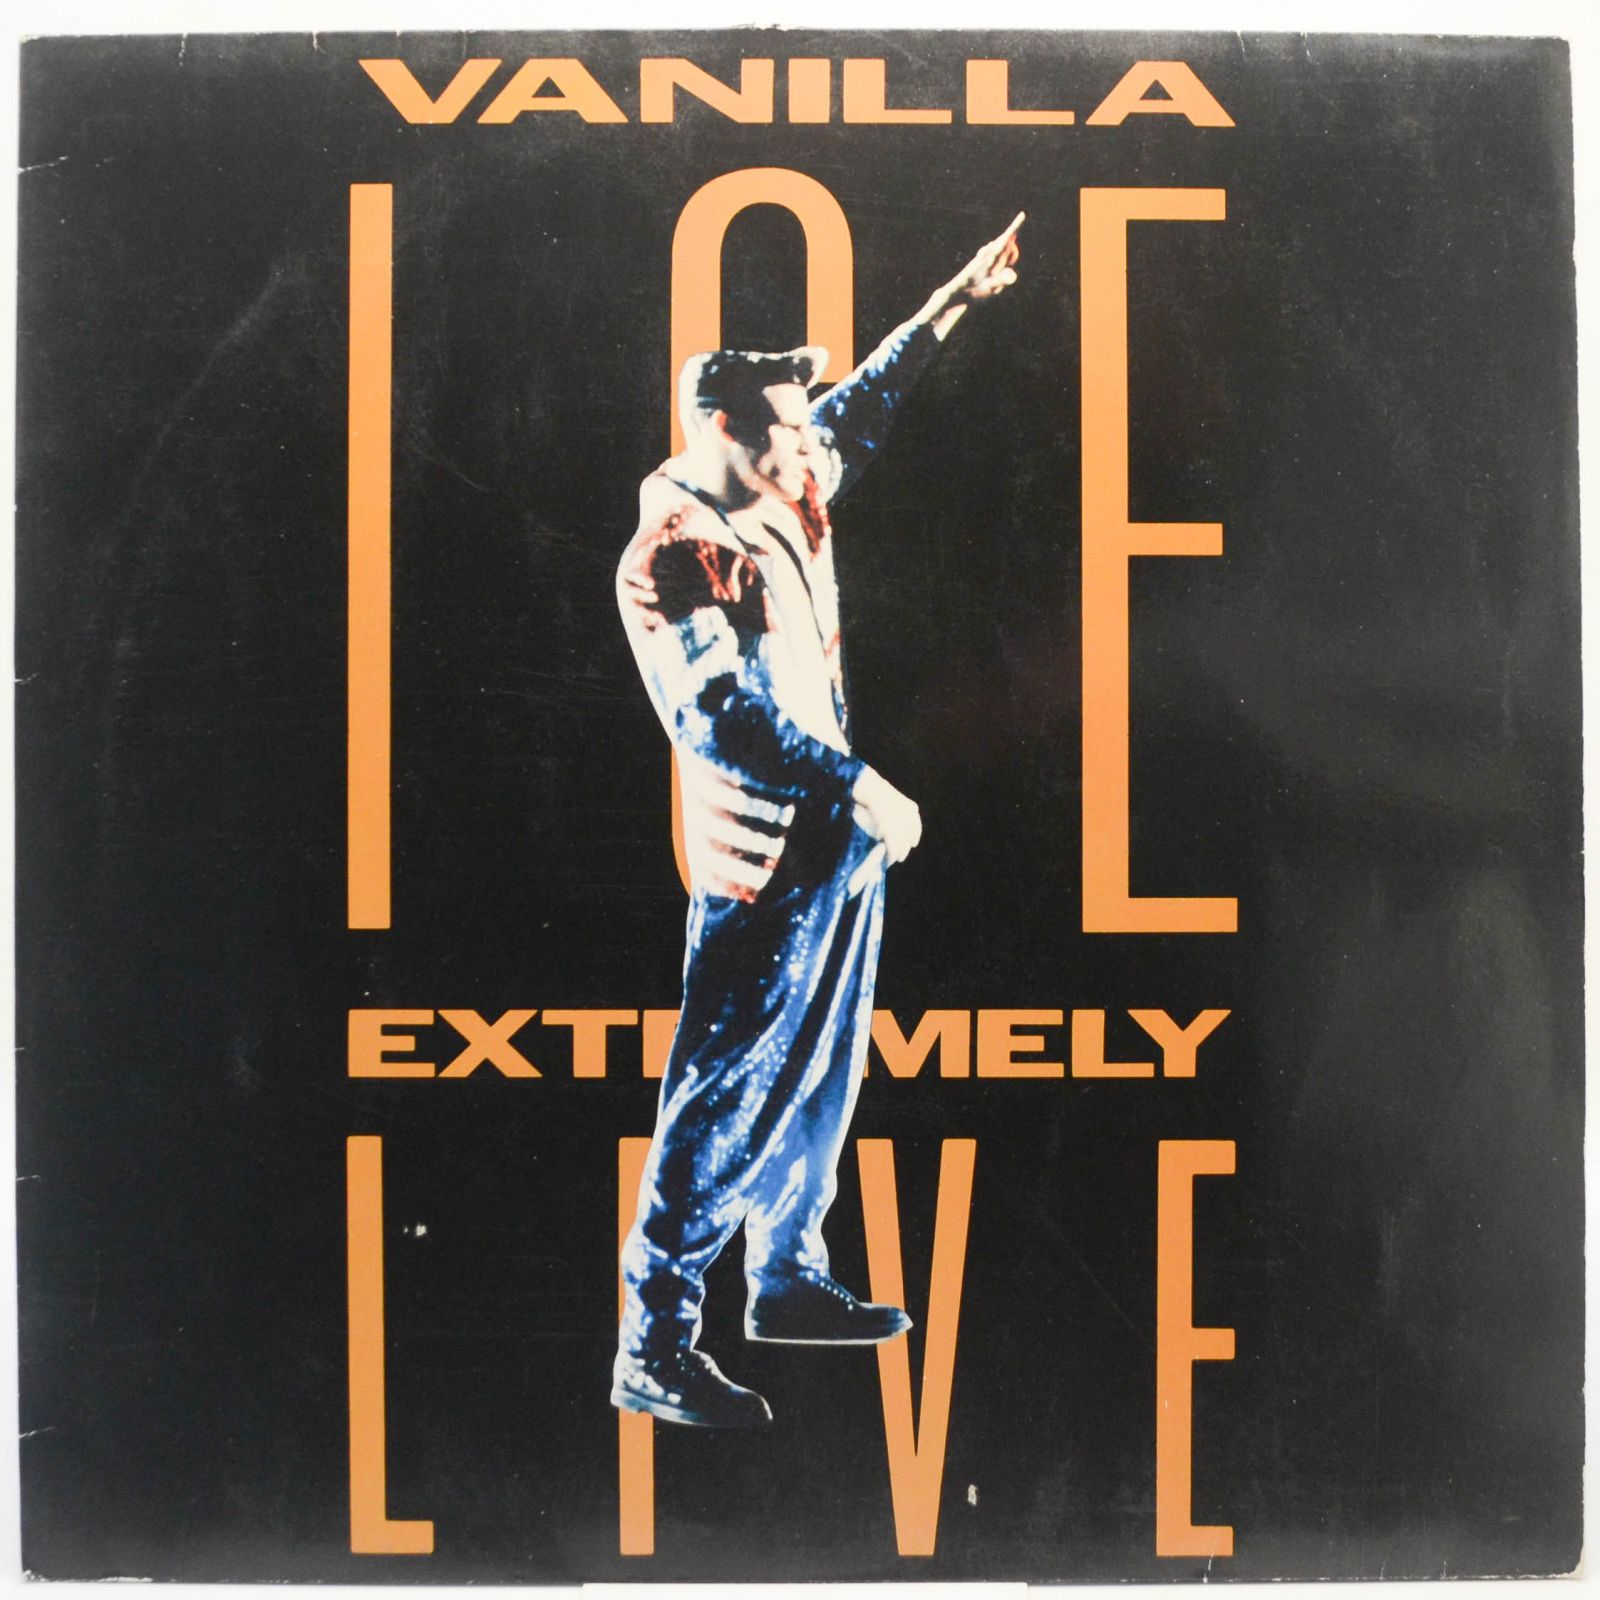 Extremely Live, 1991